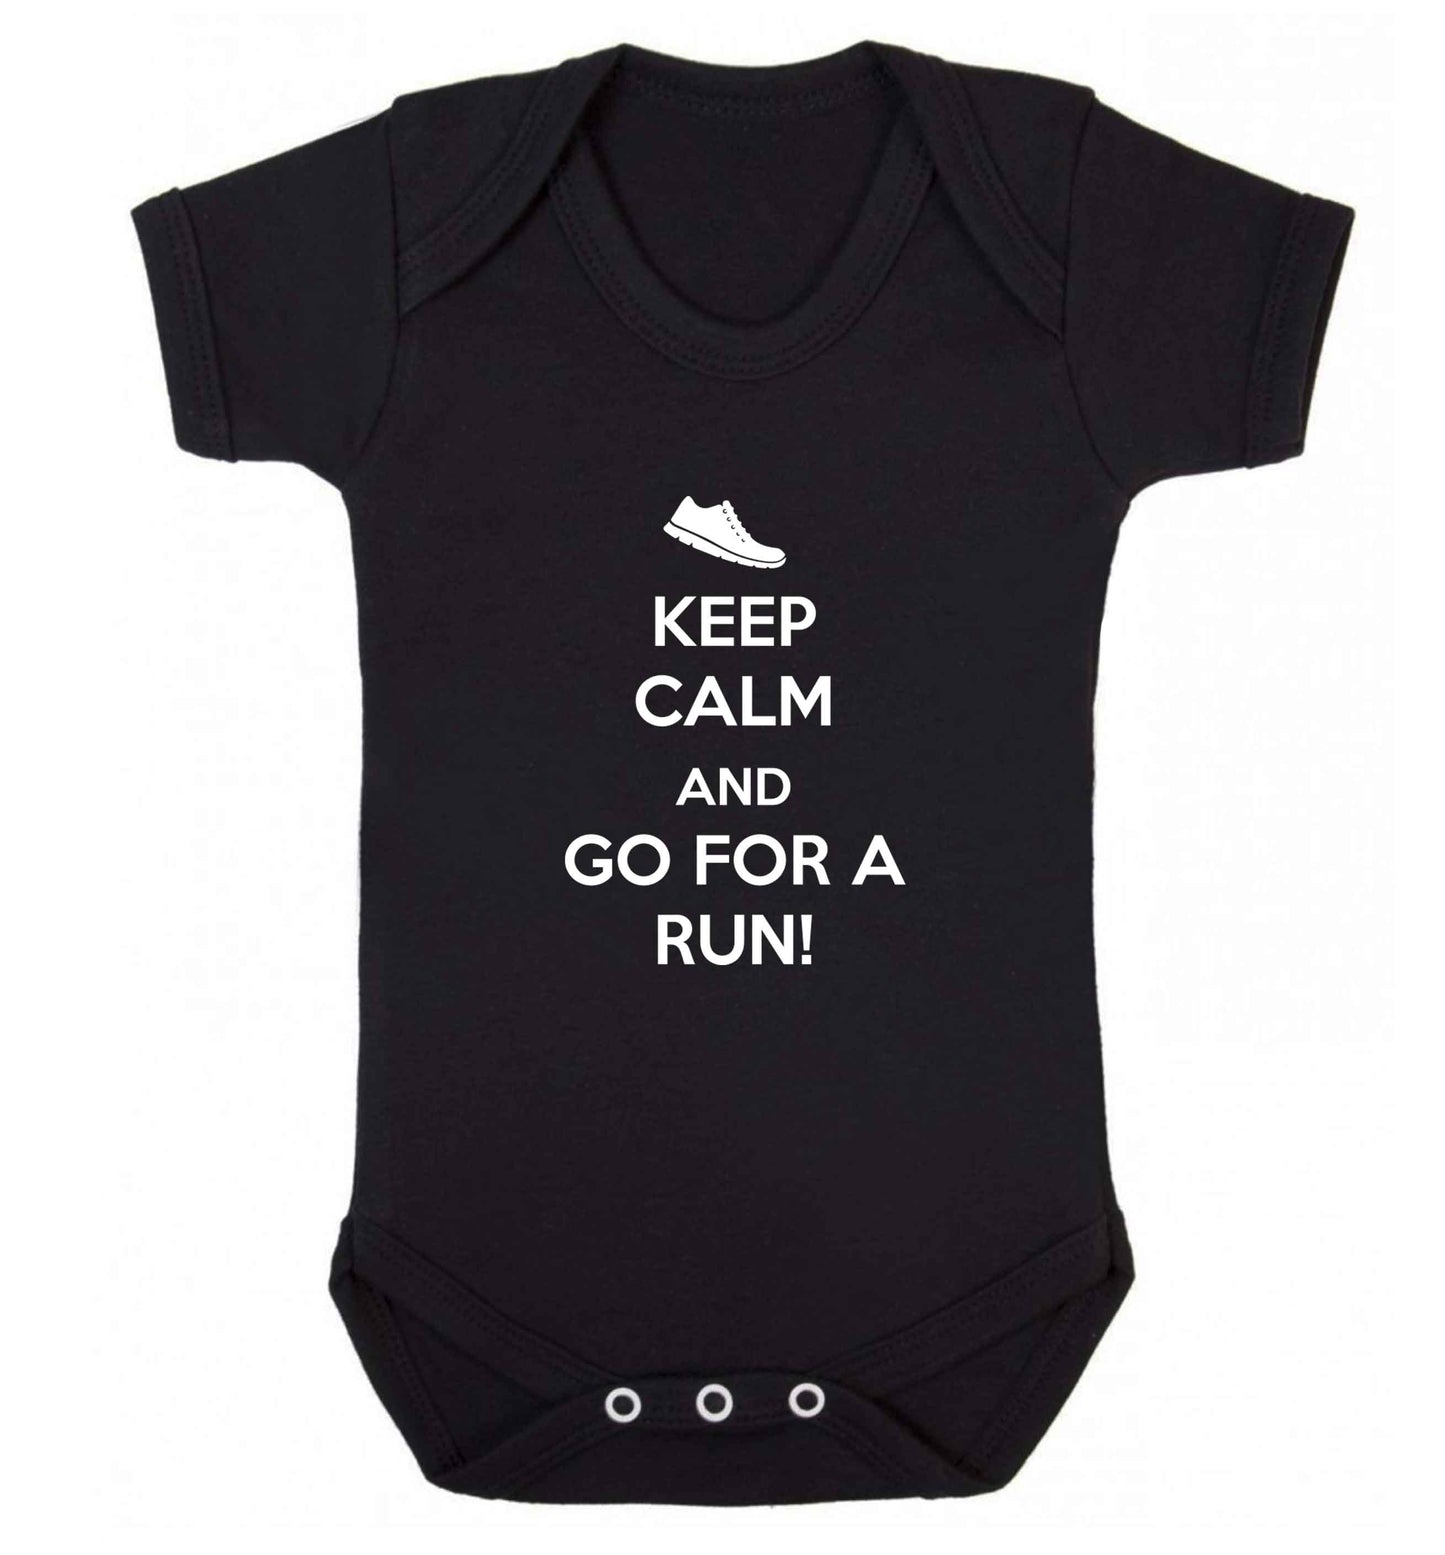 Keep calm and go for a run baby vest black 18-24 months